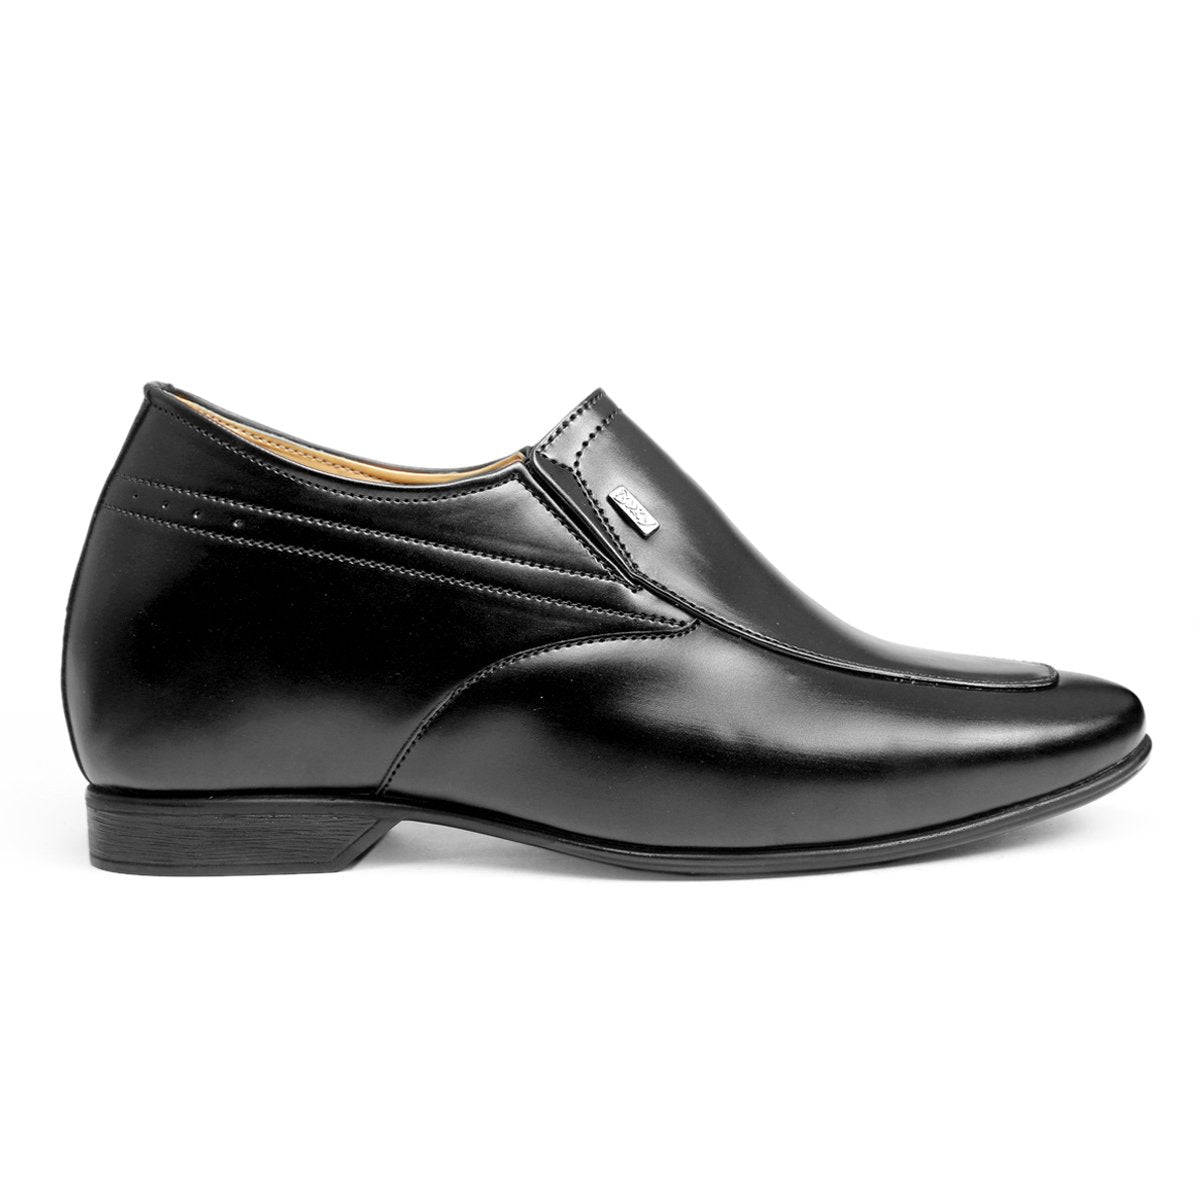 BXXY 9 cm (3.5 Inch) Hidden Height Increasing Faux Leather Material Slip-on Formal Shoes